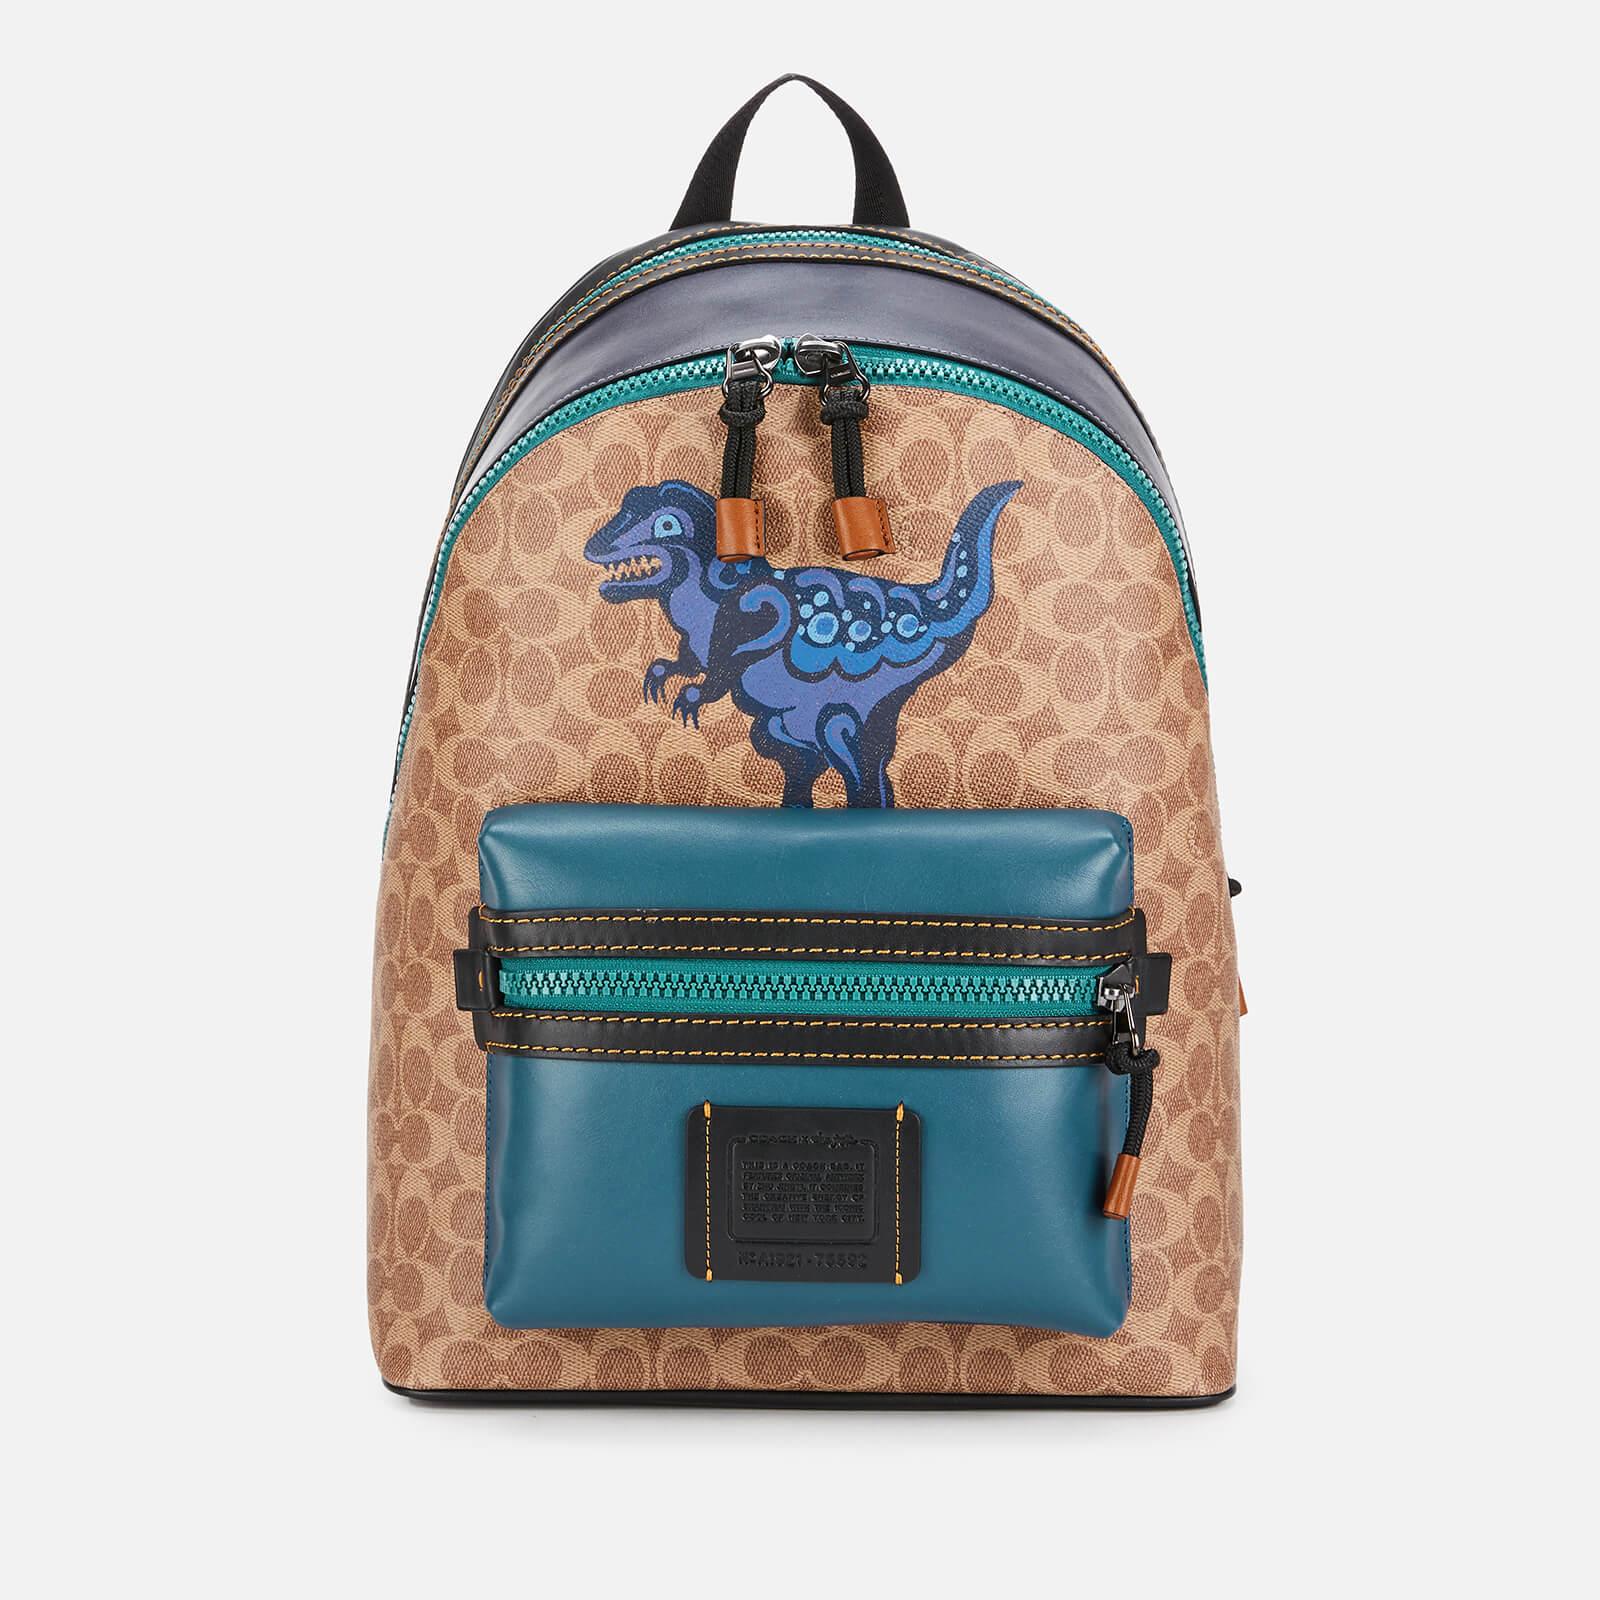 coach backpack dinosaur > Purchase - 62%